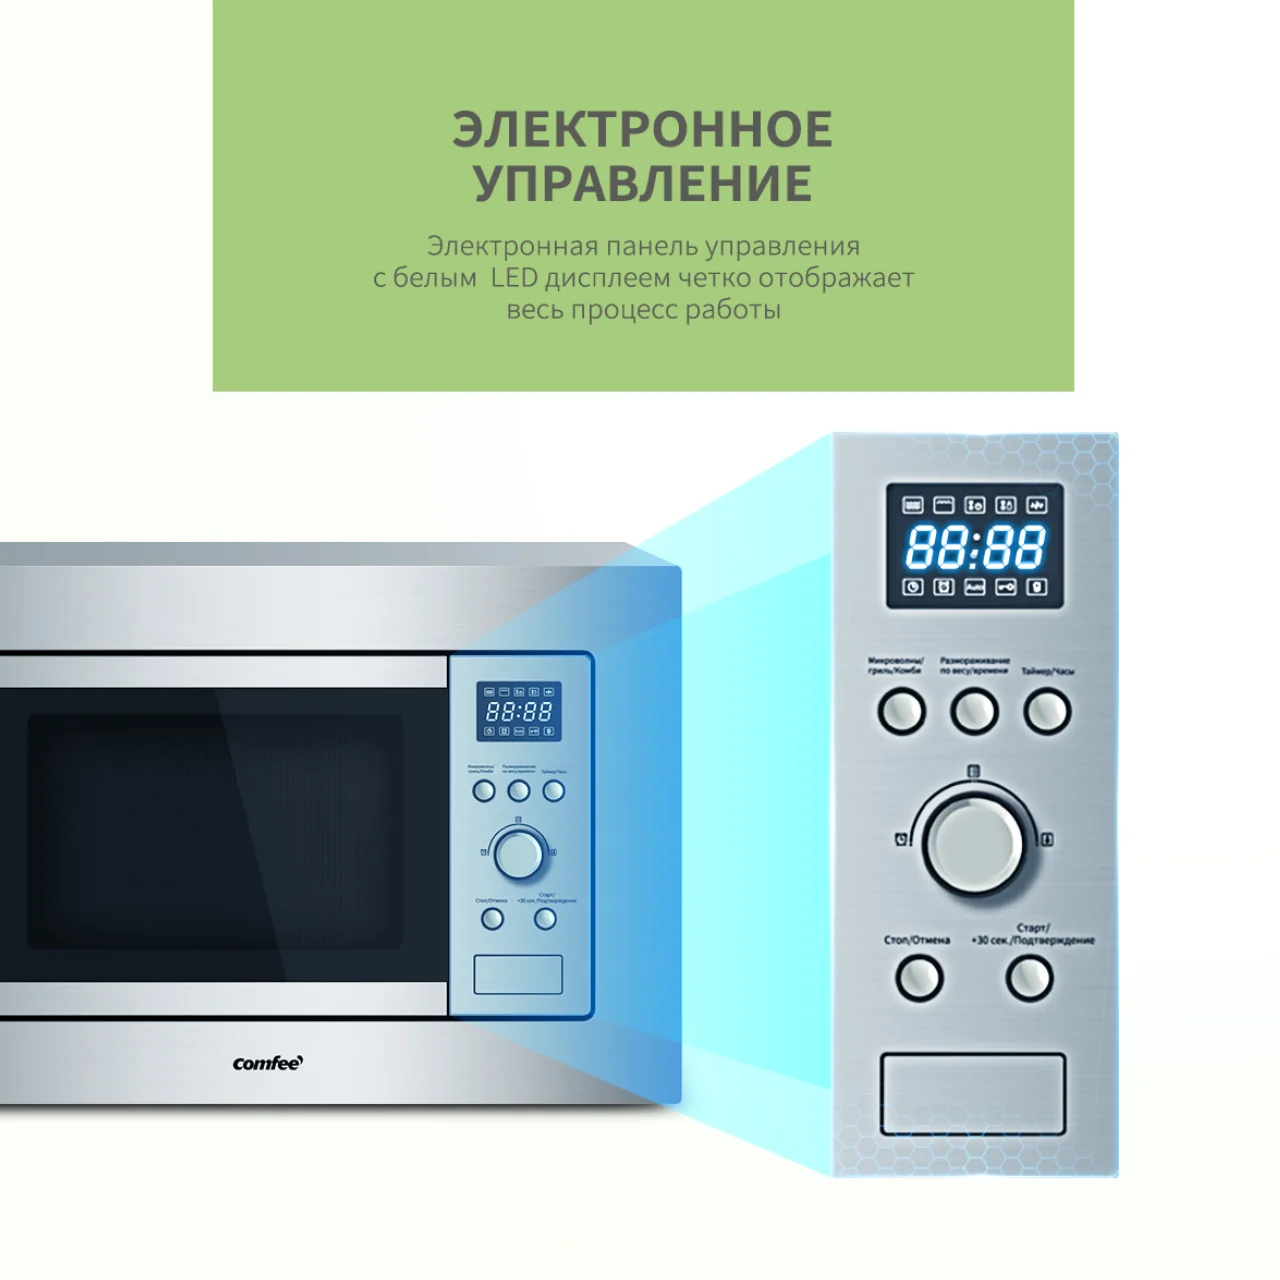 https://ae01.alicdn.com/kf/U34adb22809e1415fb17ec950466a6996g/Built-in-microwave-oven-Comfee-CBM201X-800-W-20-L-8-programs-grill-stainless-steel-silver.png